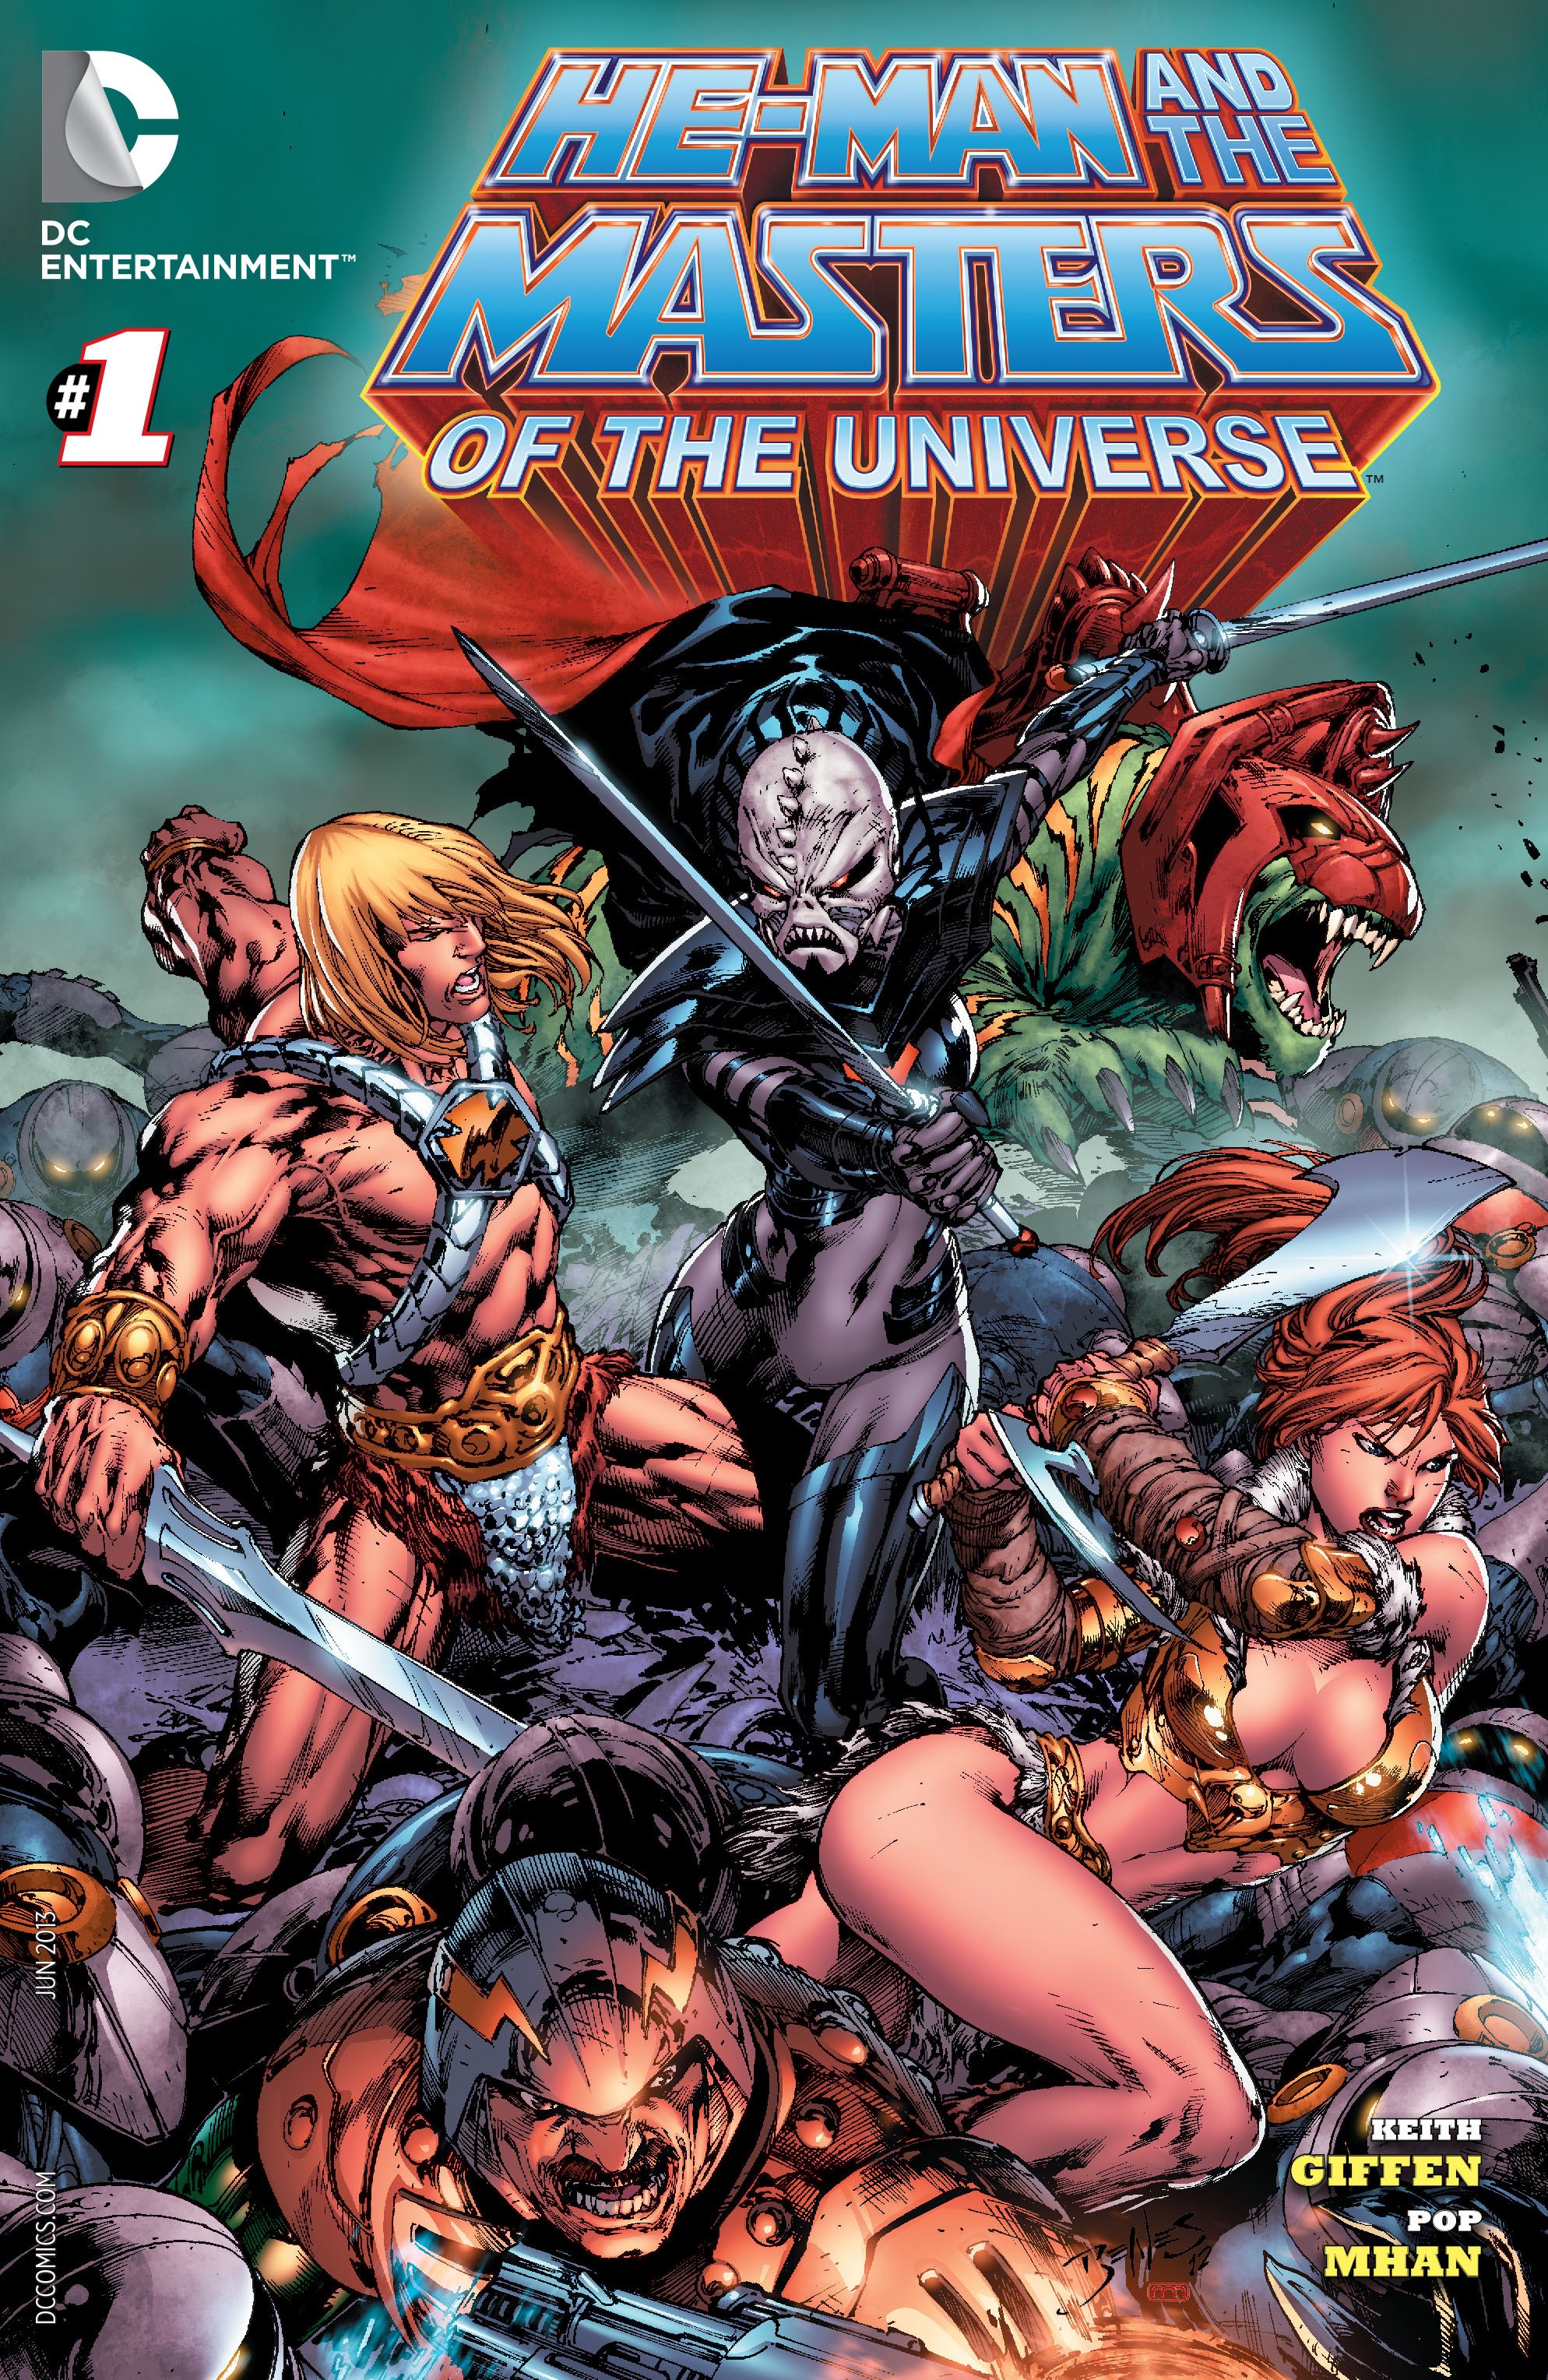 He-Man and the Masters of the Universe Vol. 2 #1